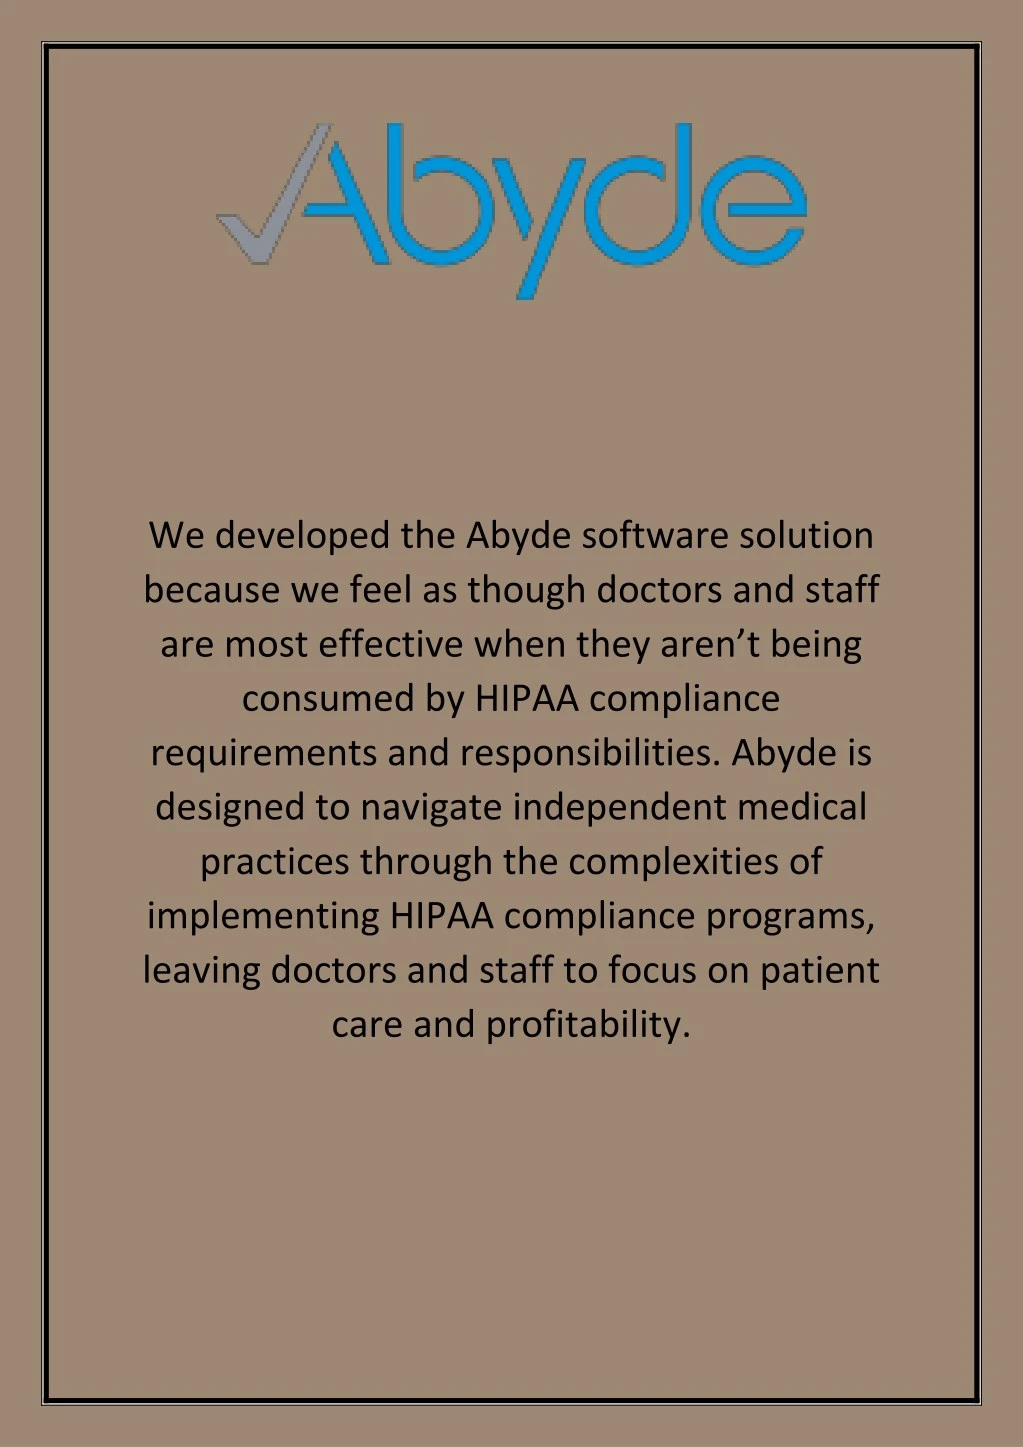 we developed the abyde software solution because